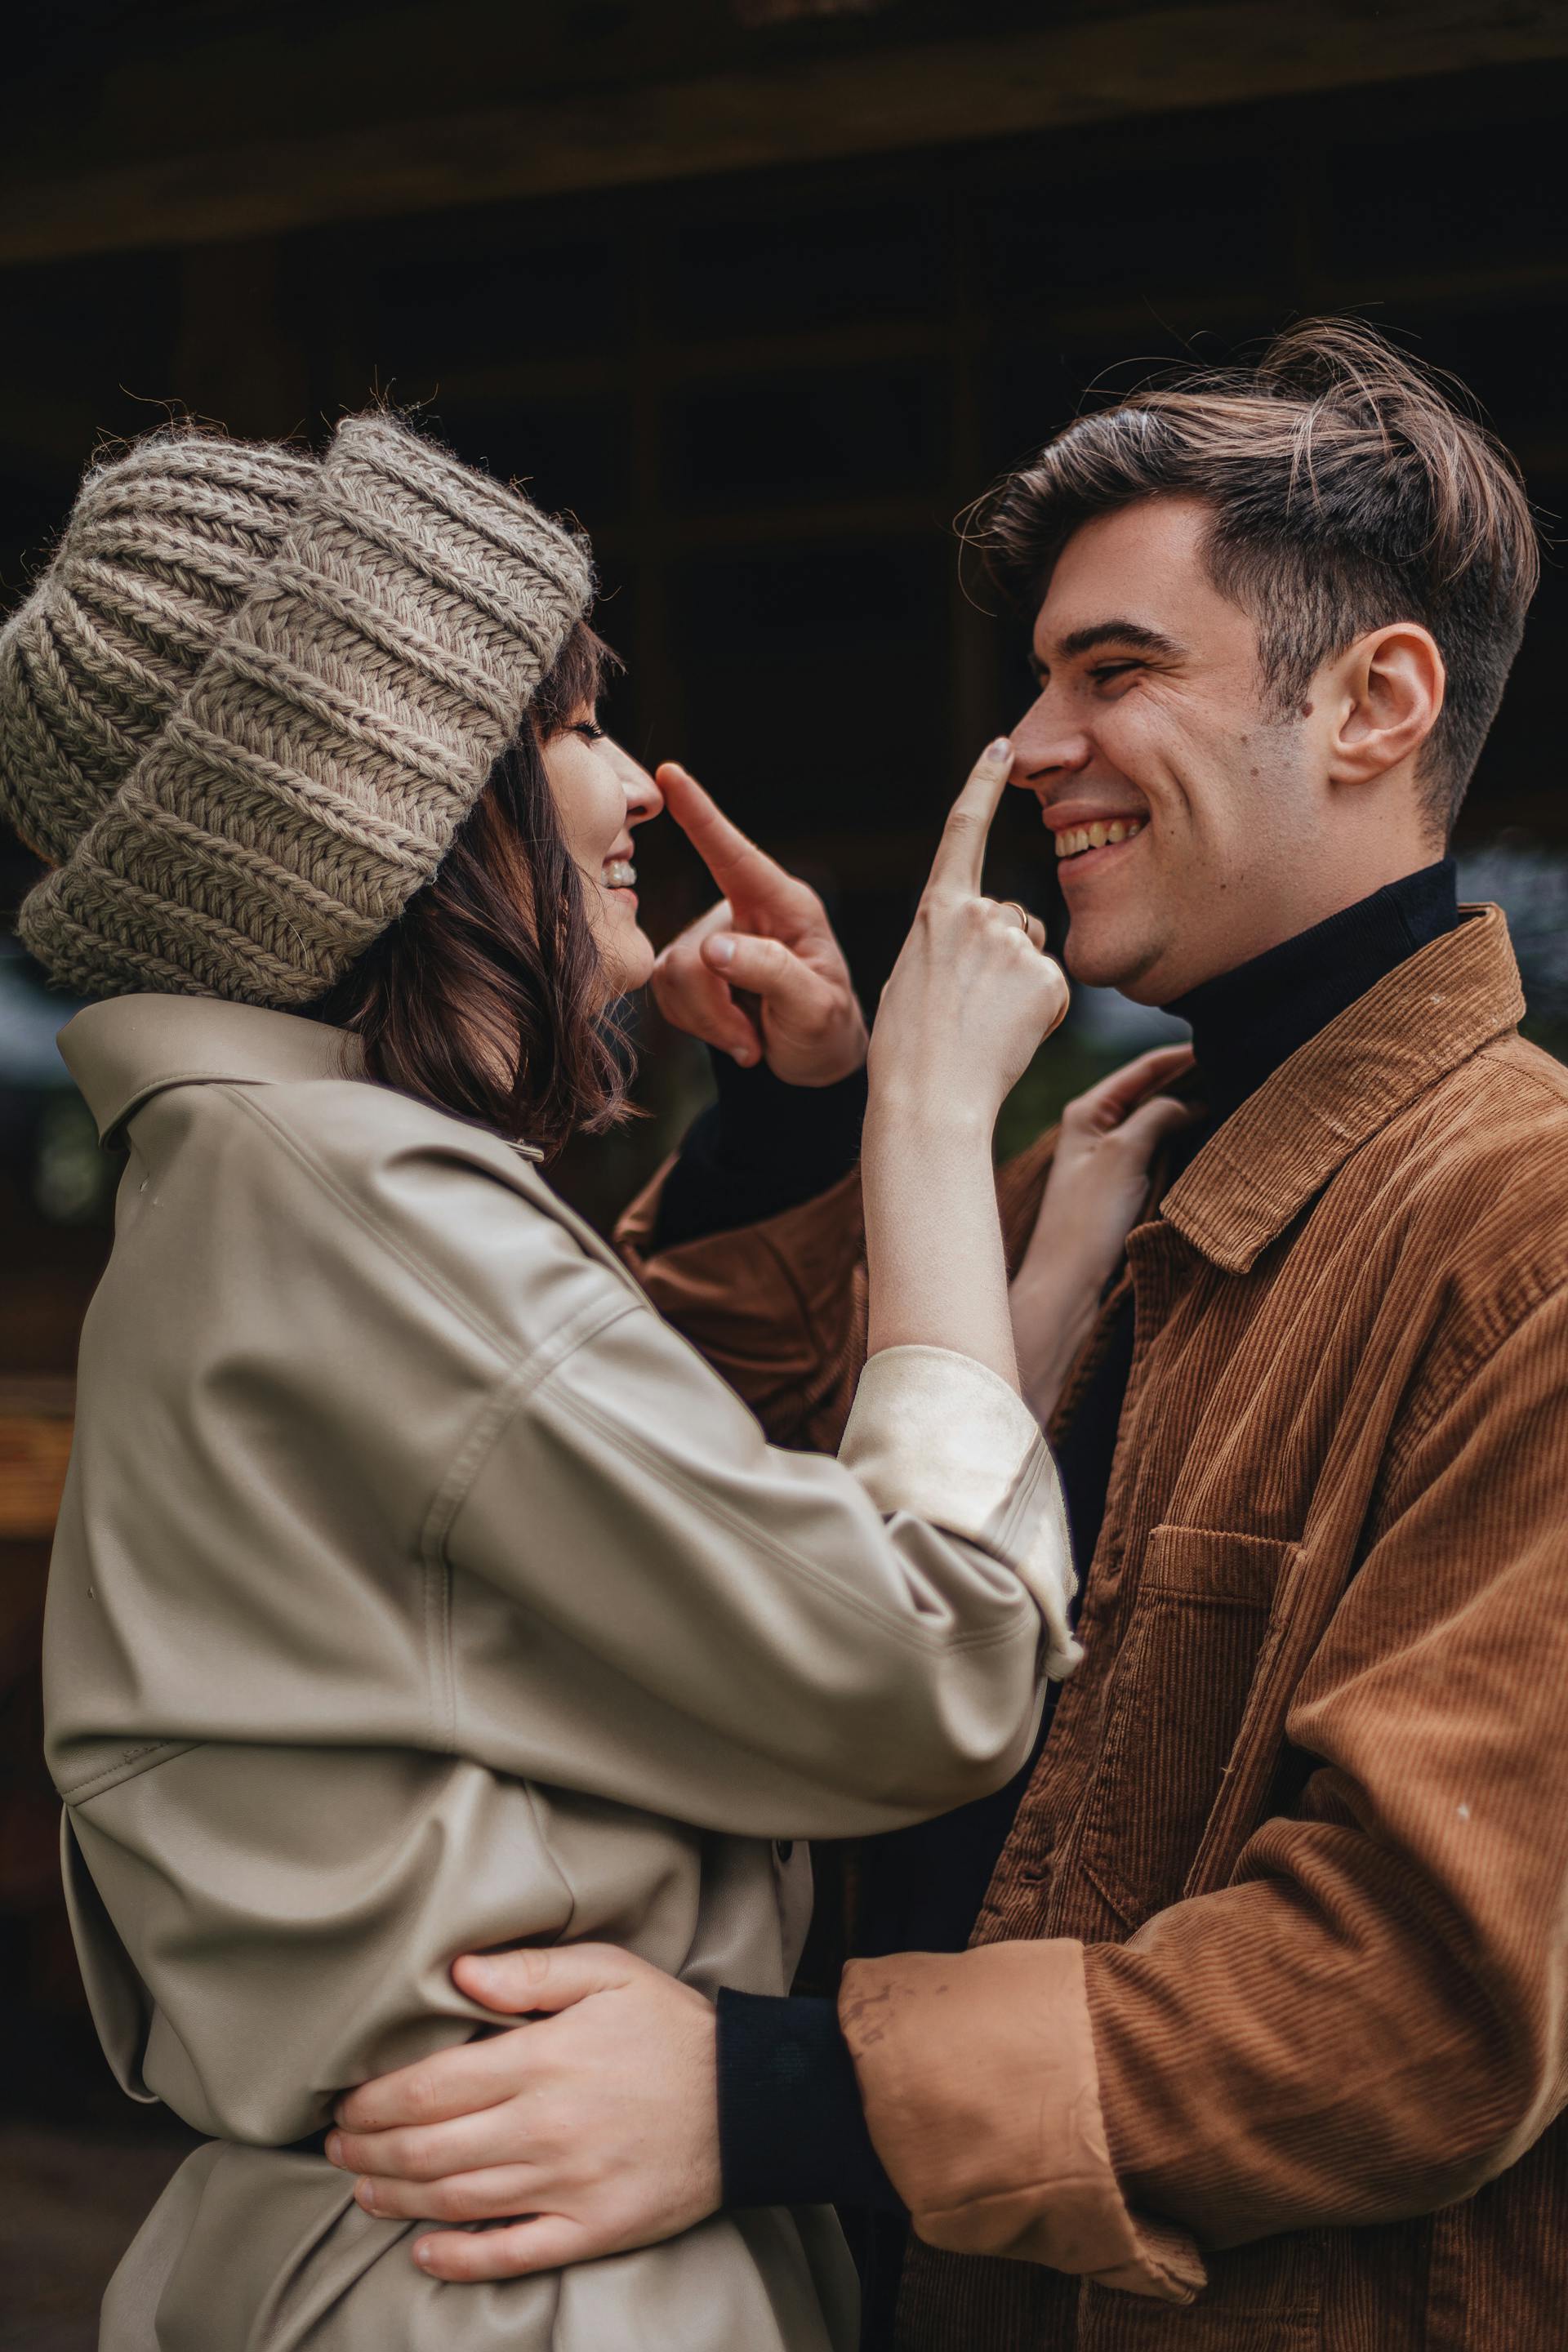 A couple laughing while stroking each other's noses | Source: Pexels